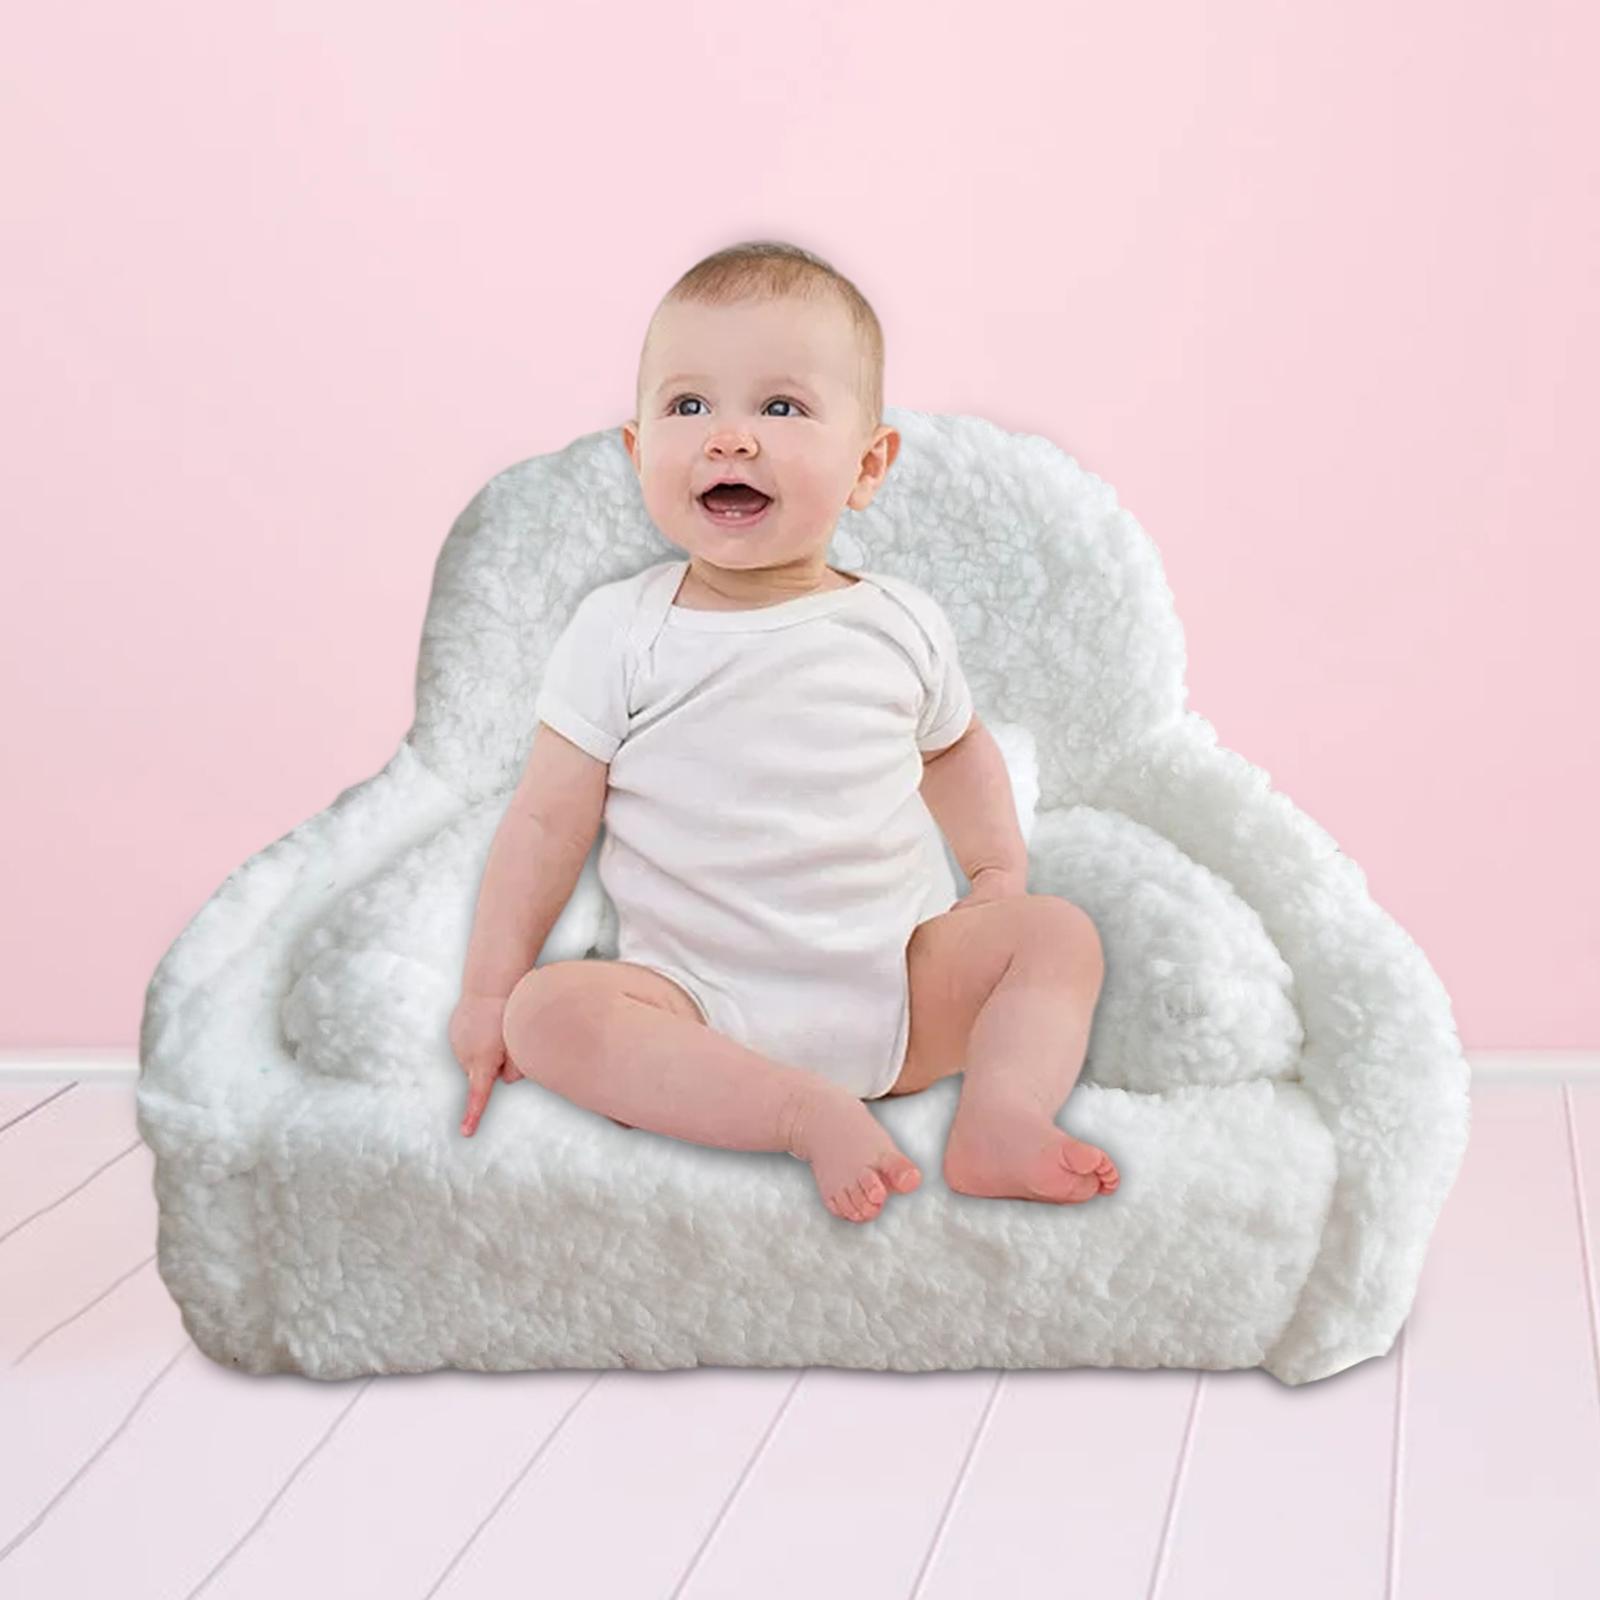 Baby Photo Props Baby Posing Sofa Pillow Photography Props Baby Photo Modeling for Infant Toddler